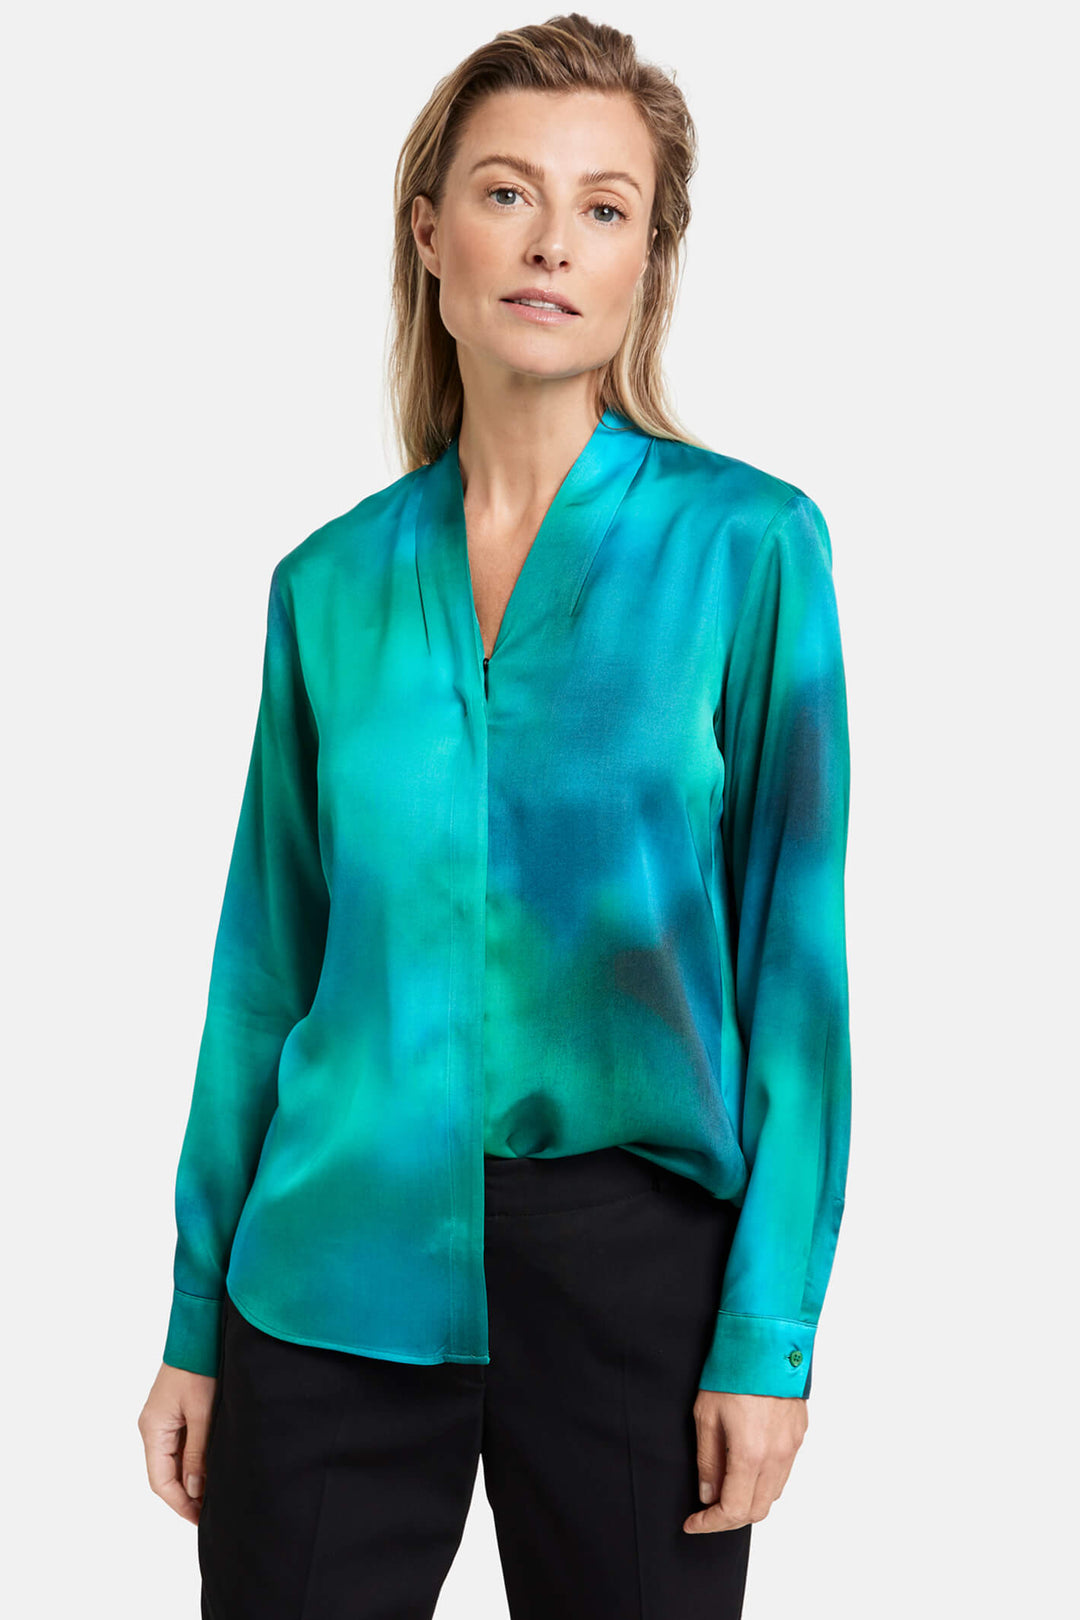 Gerry Weber 260042 Green Print Blouse - Experience Boutique